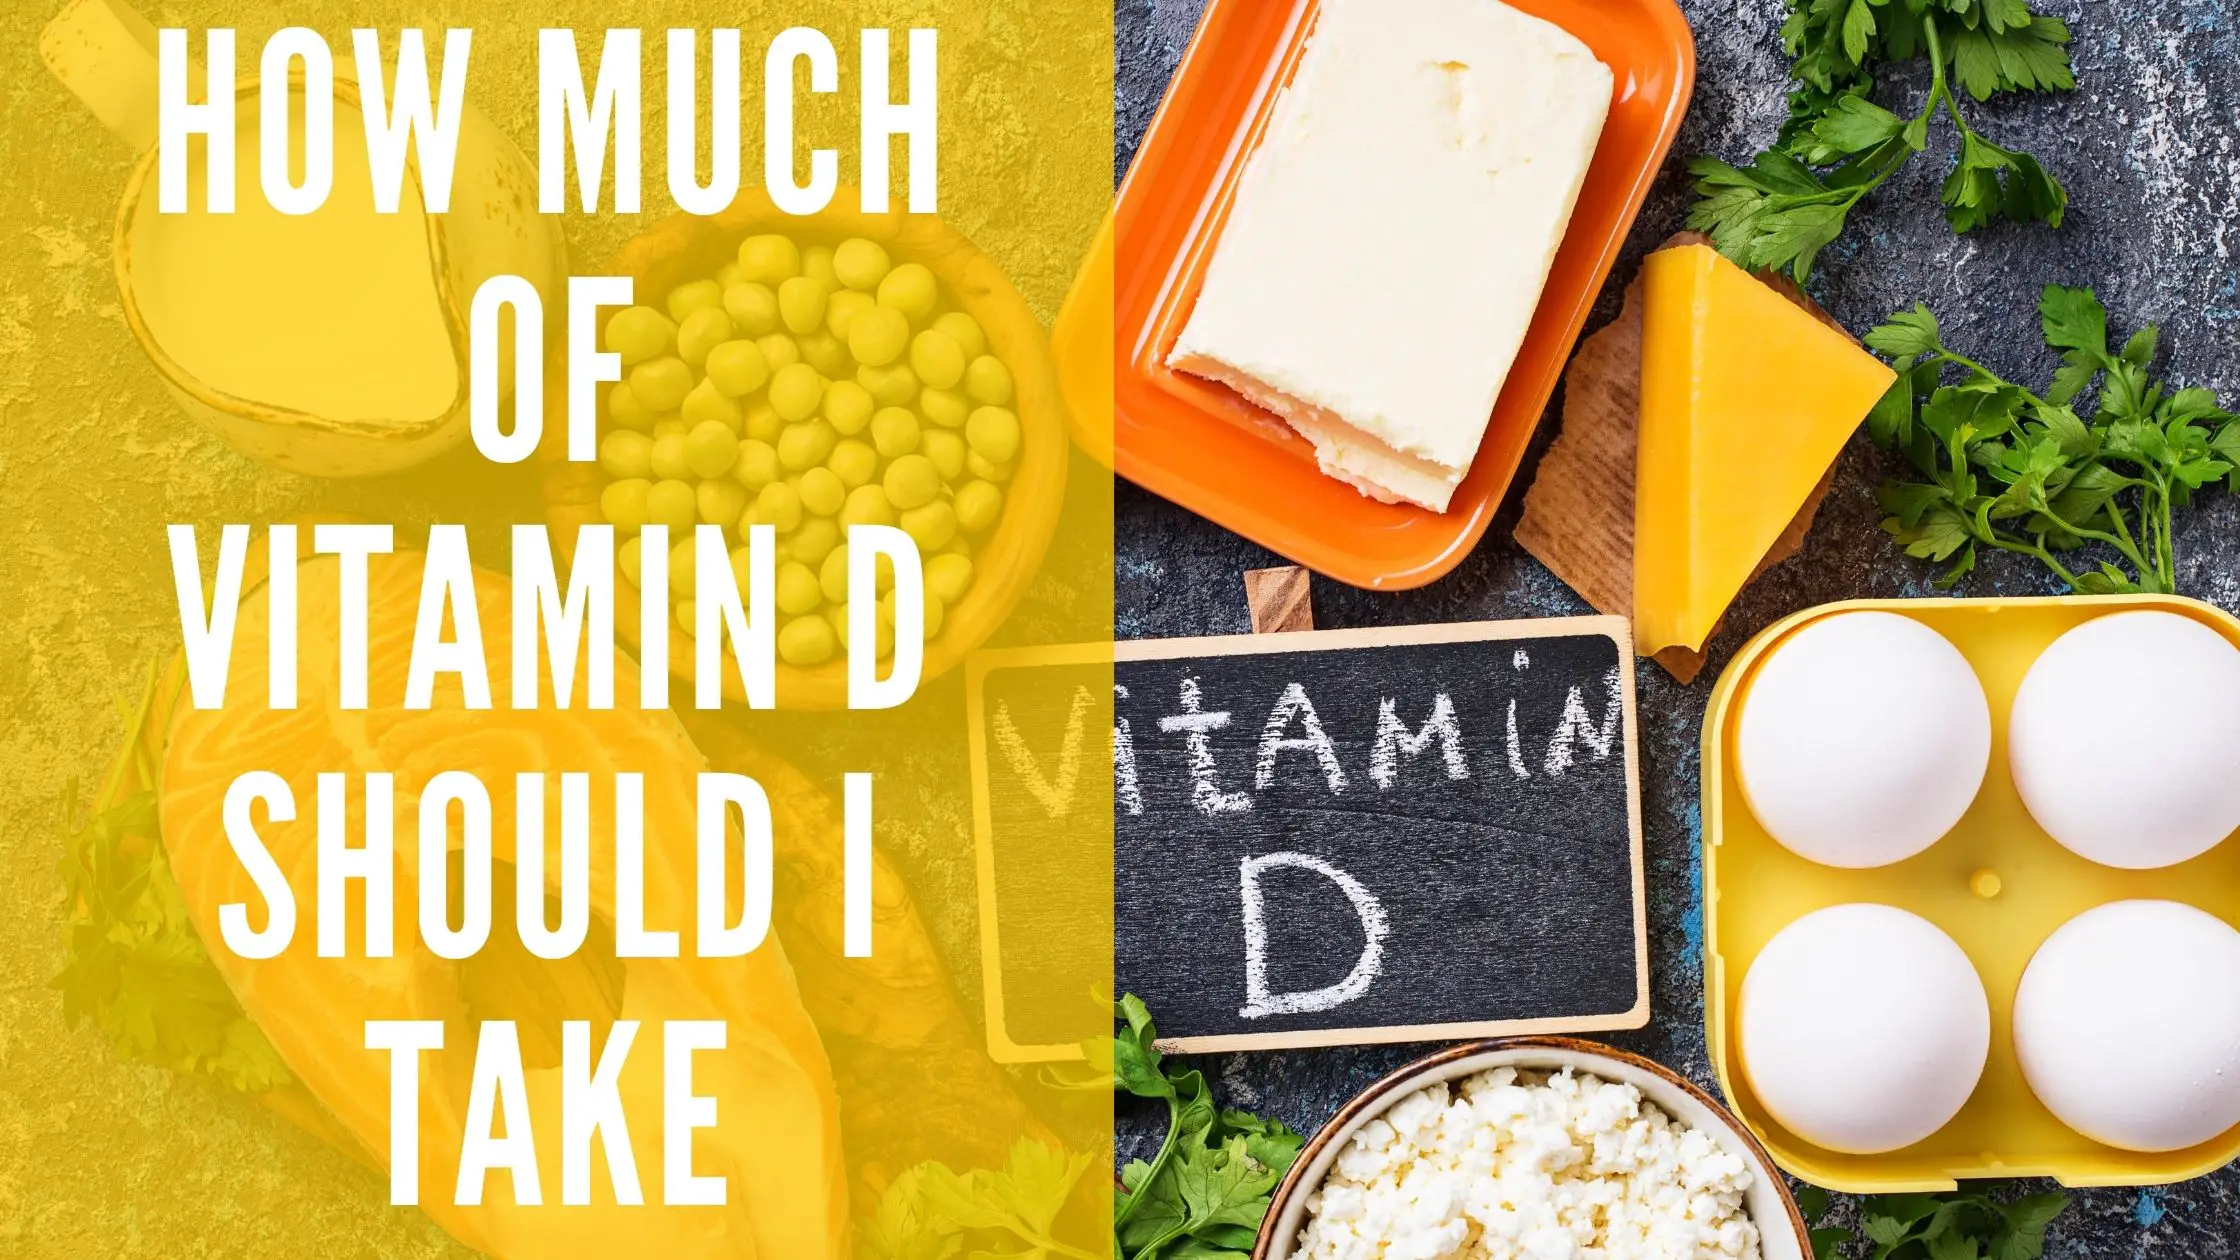 How much of Vitamin D should I take?